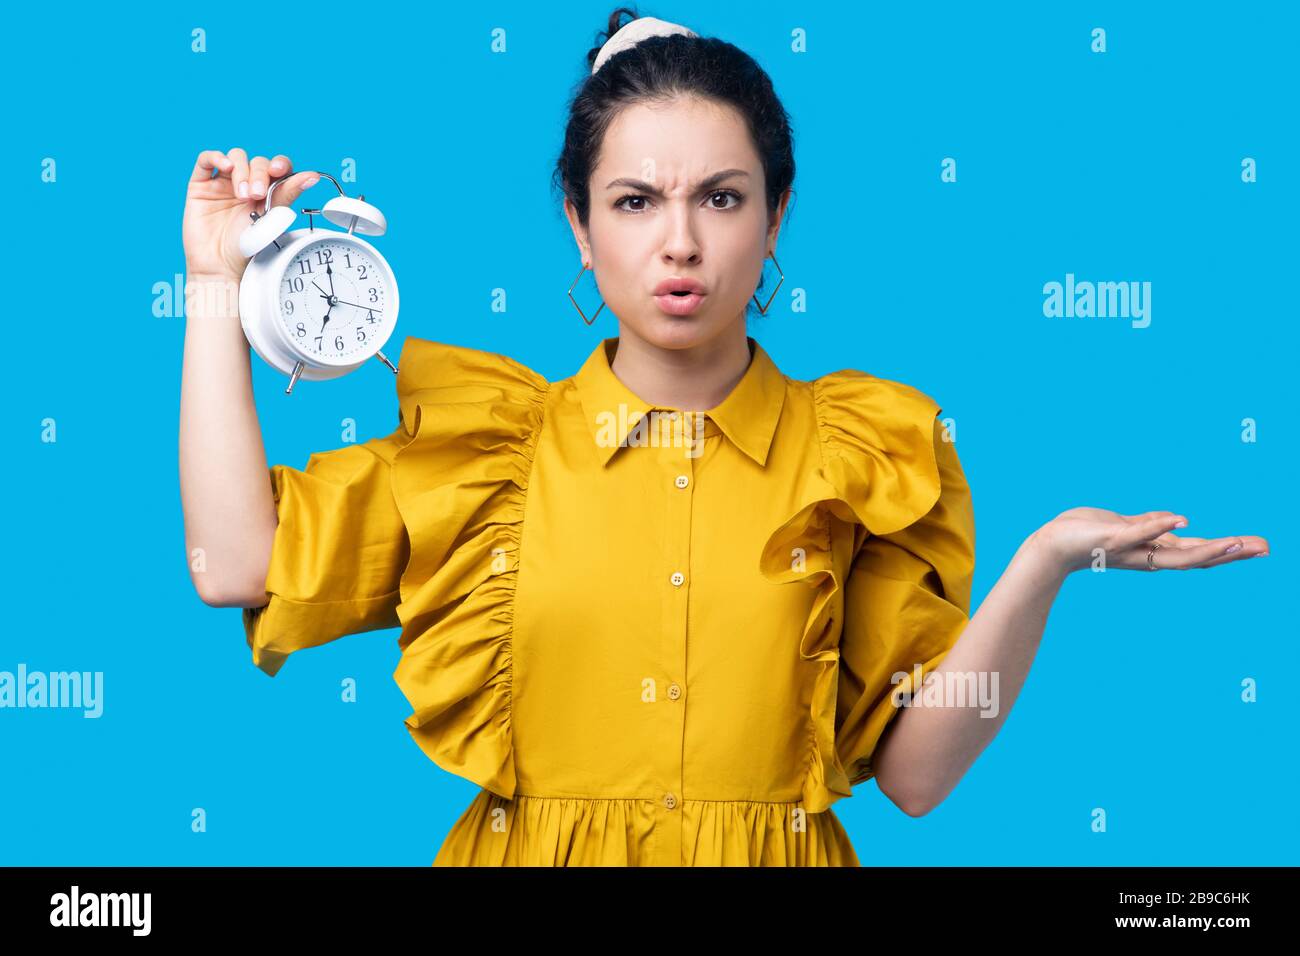 Woman in a mustard dress holding a clock and looking uncertain Stock Photo